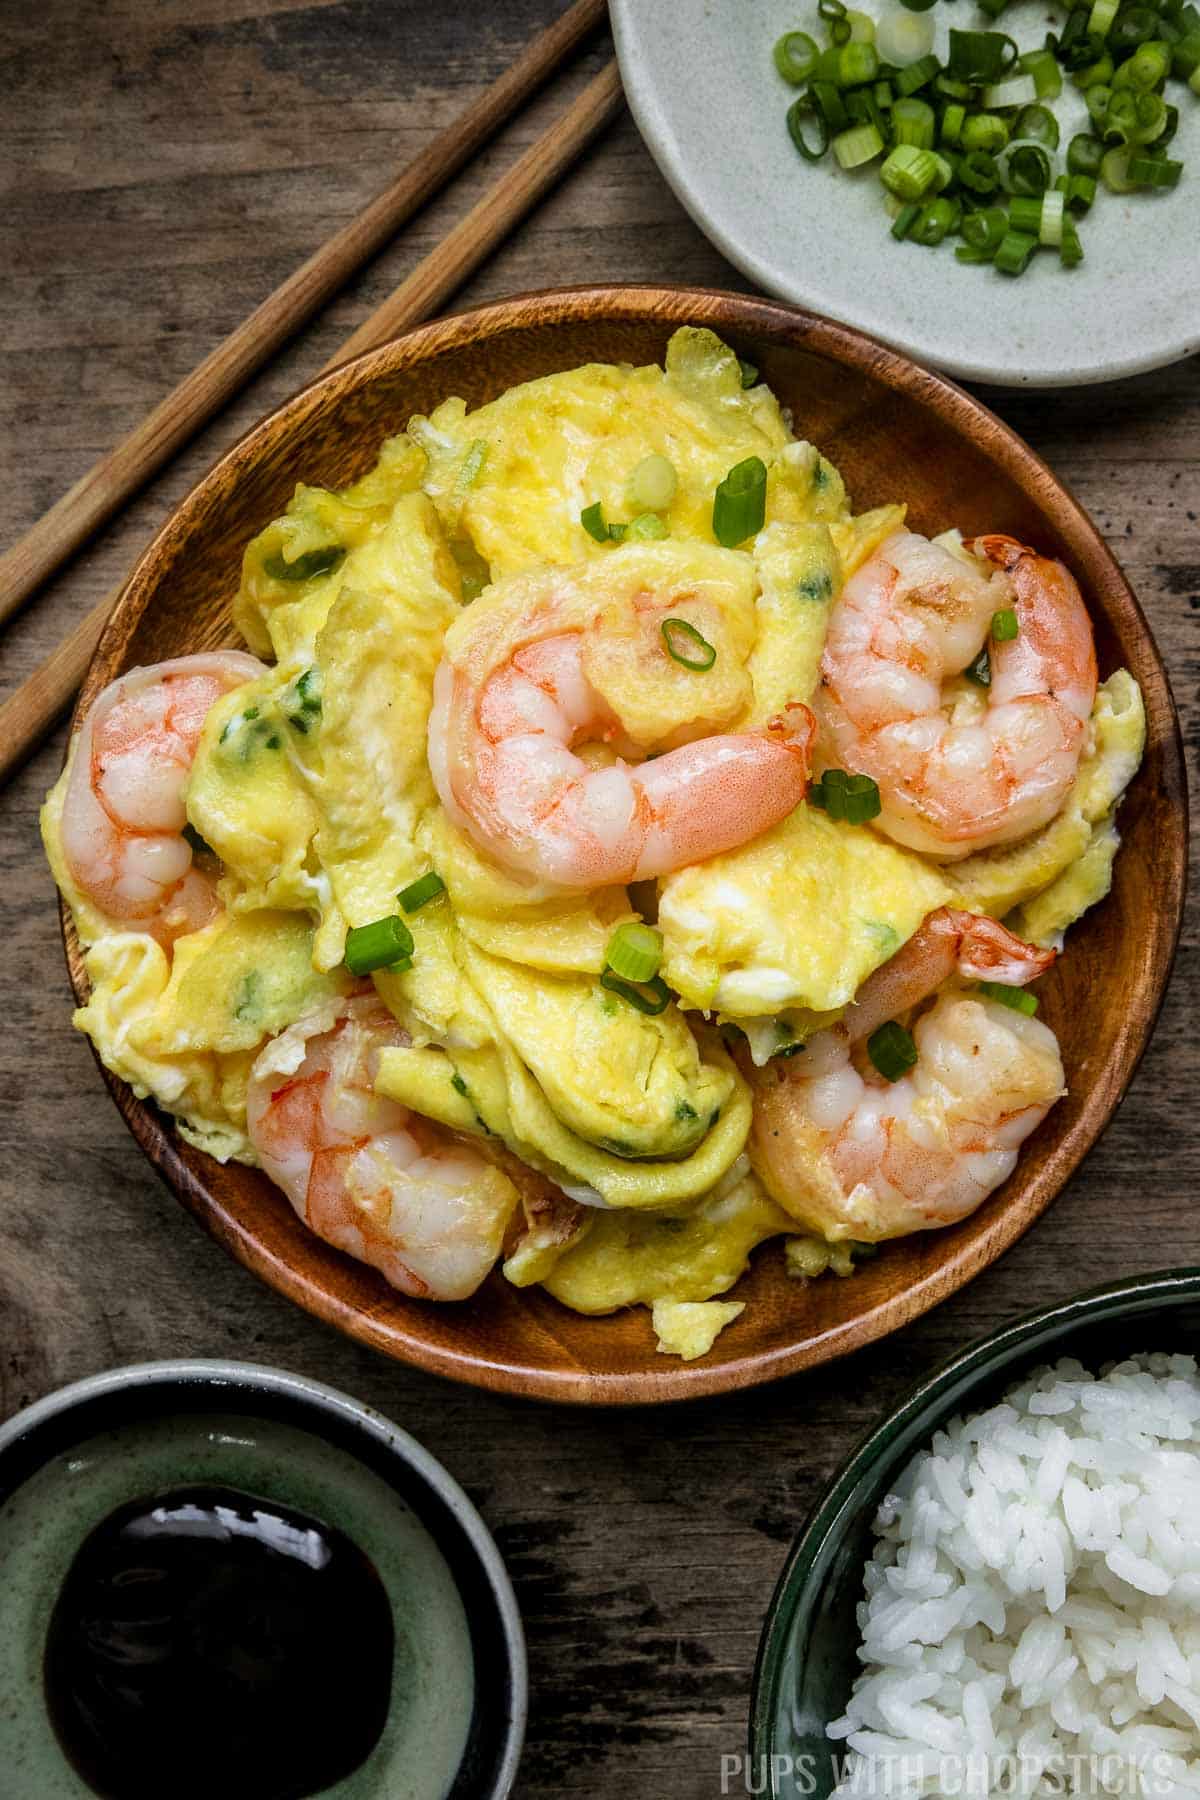 Chinese scrambled eggs and shrimp stir fry served on a wooden plate with a side of white rice